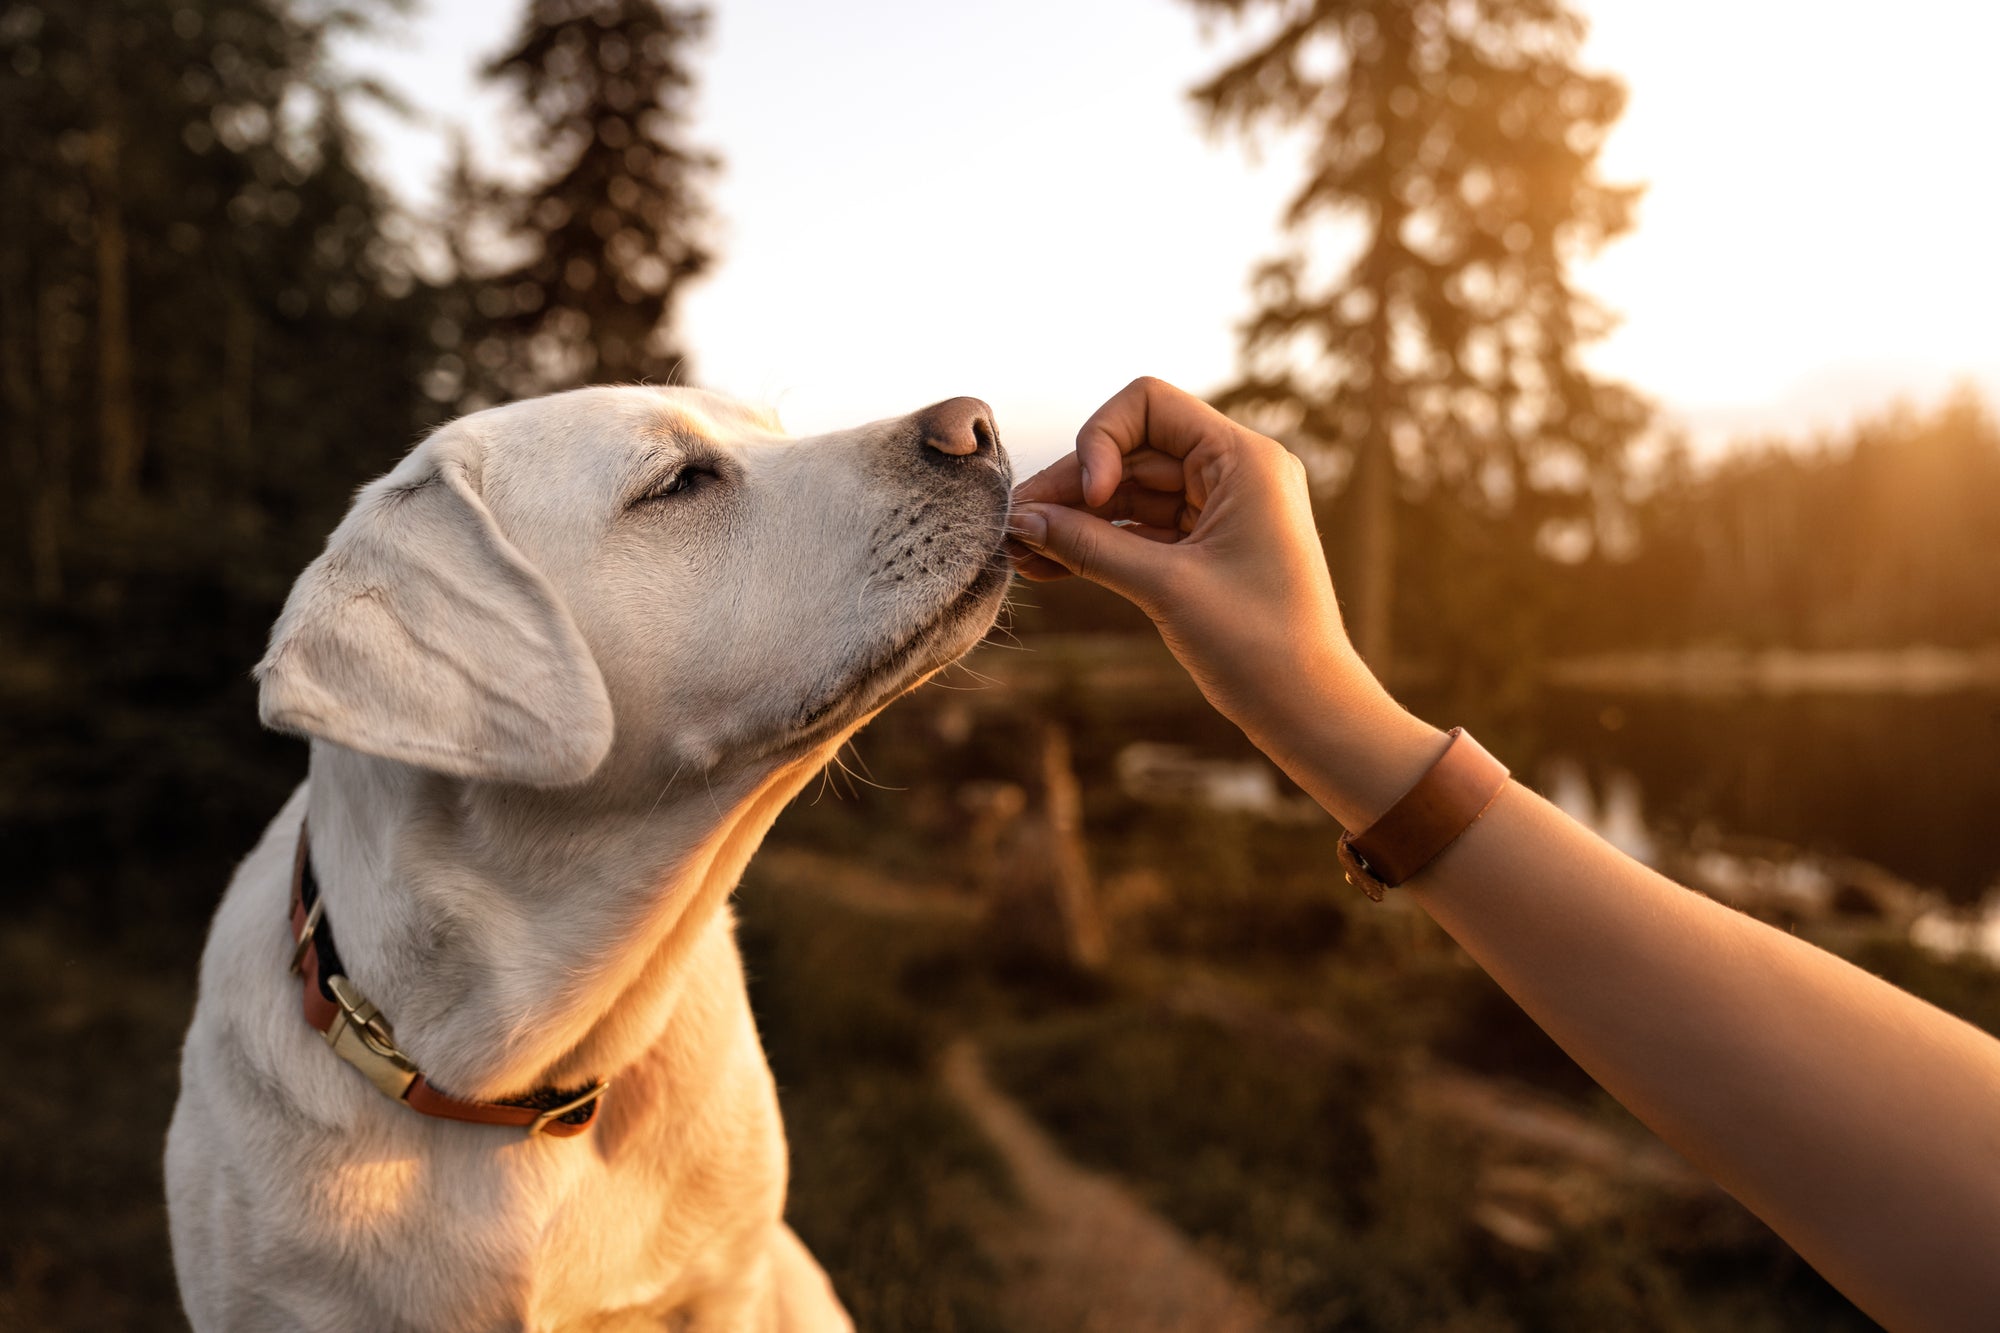 There Is a Reason So Many Dog Trainers Rely on Food to Motivate